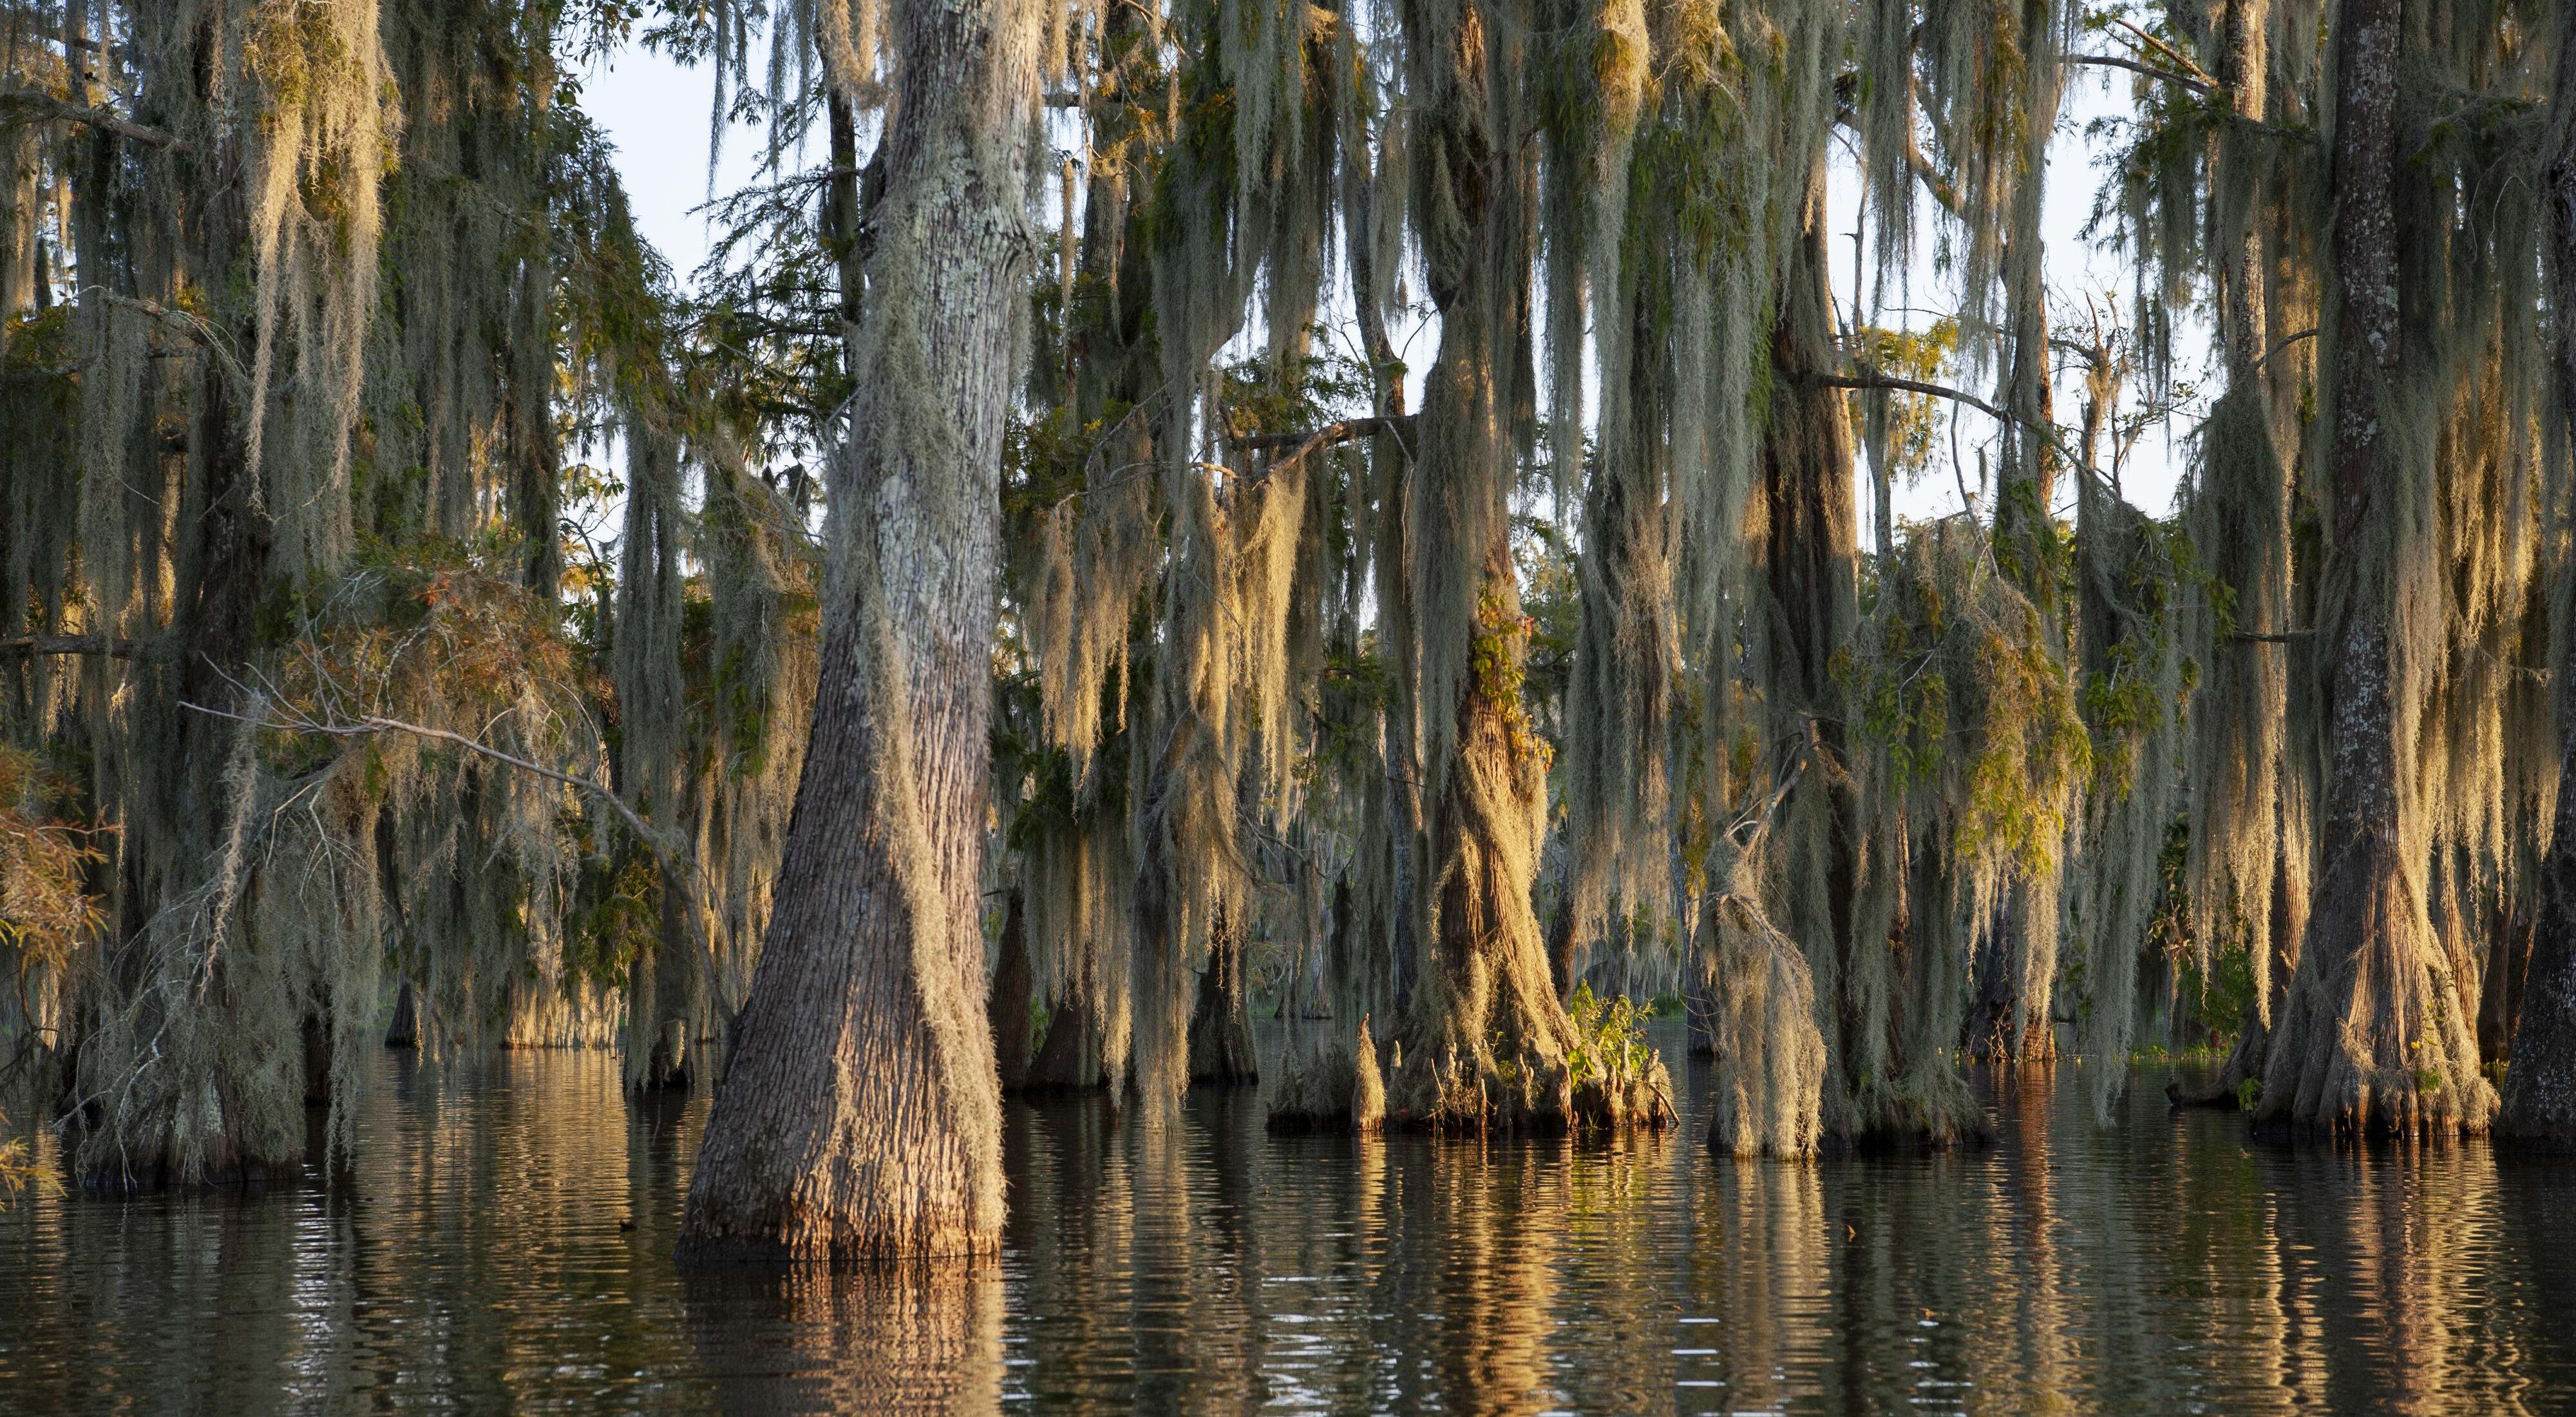 Tall cypress trees draped in dangling moss emerge from calm waters.